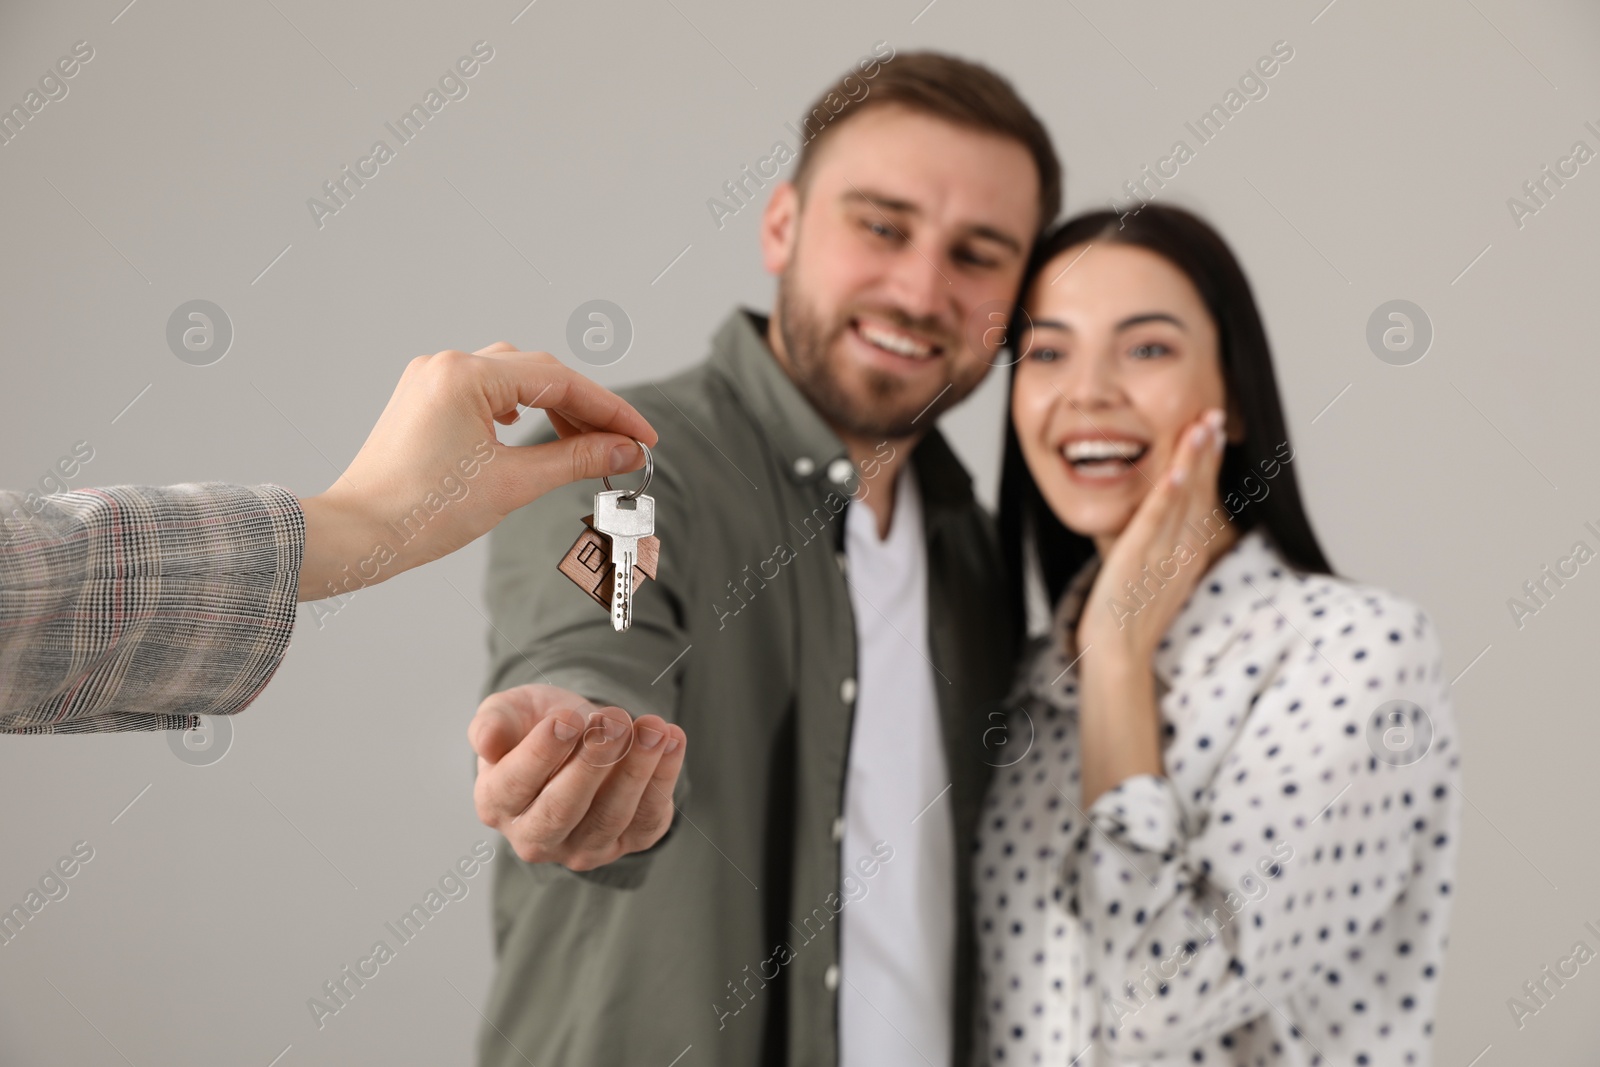 Photo of Real estate agent giving key to happy young couple against grey background, focus on hands